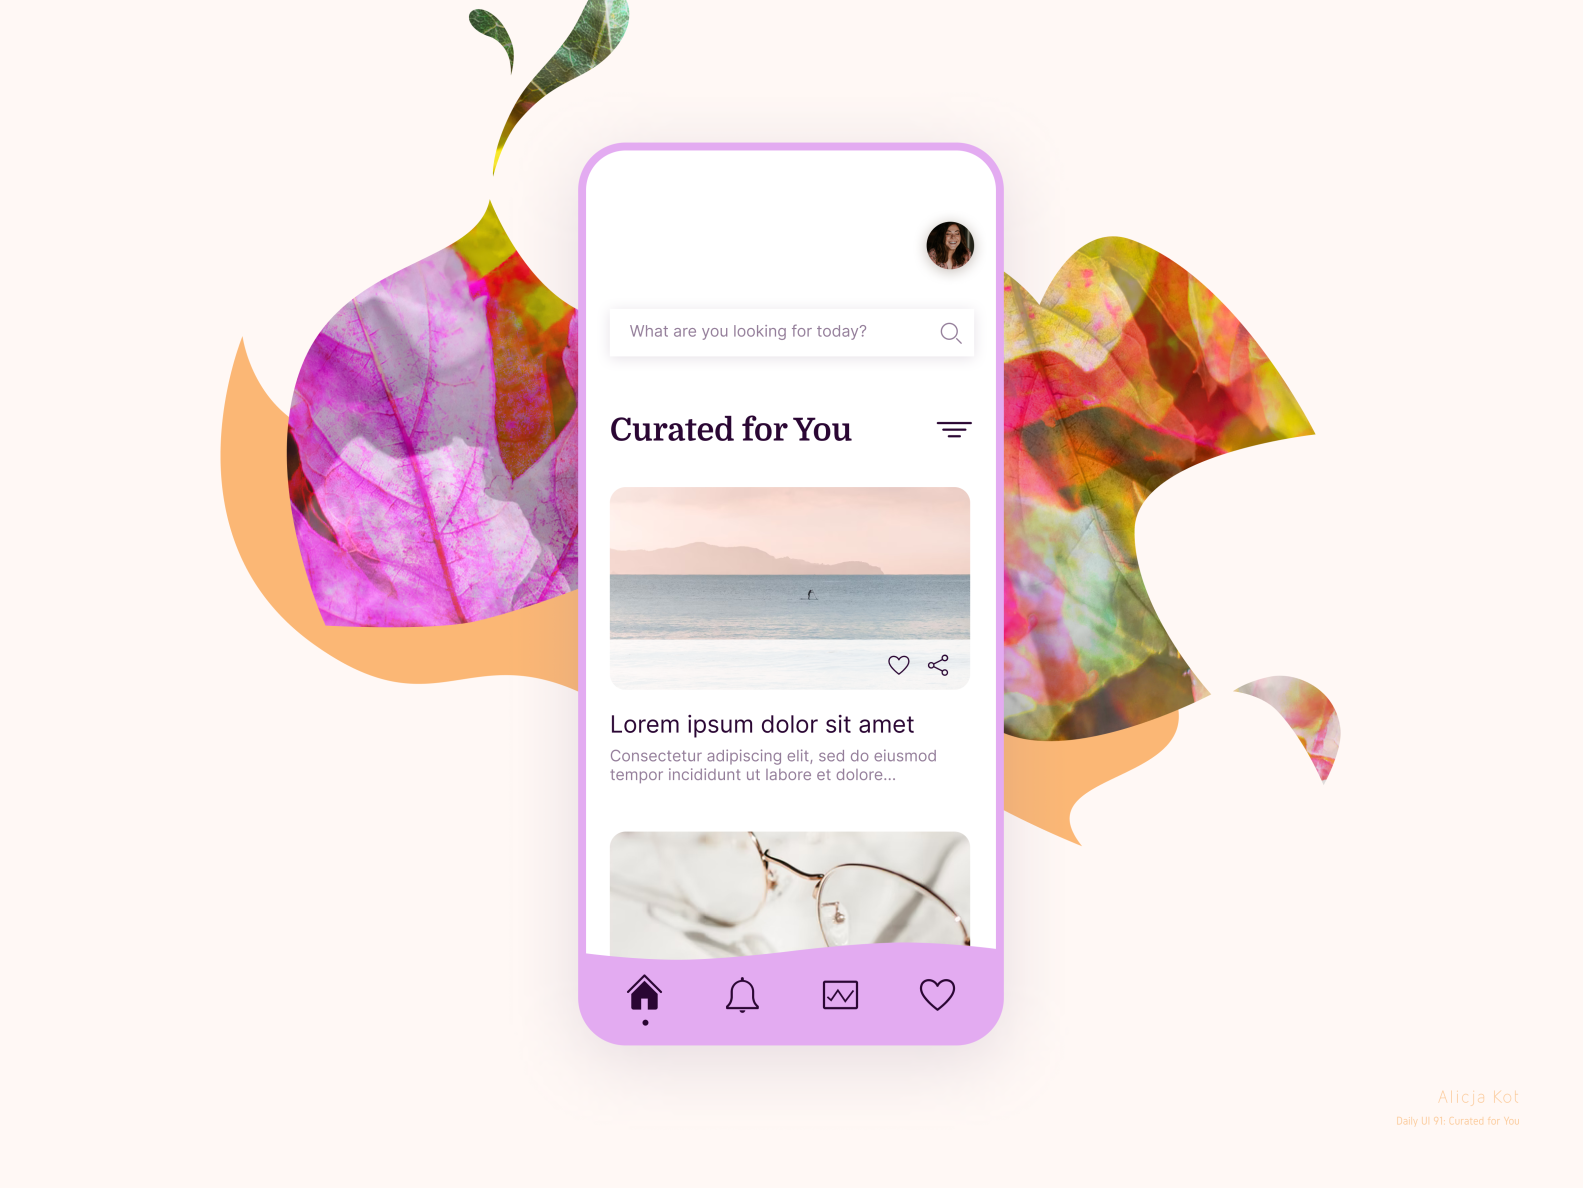 daily-ui-91-curated-for-you-by-alicja-kot-on-dribbble